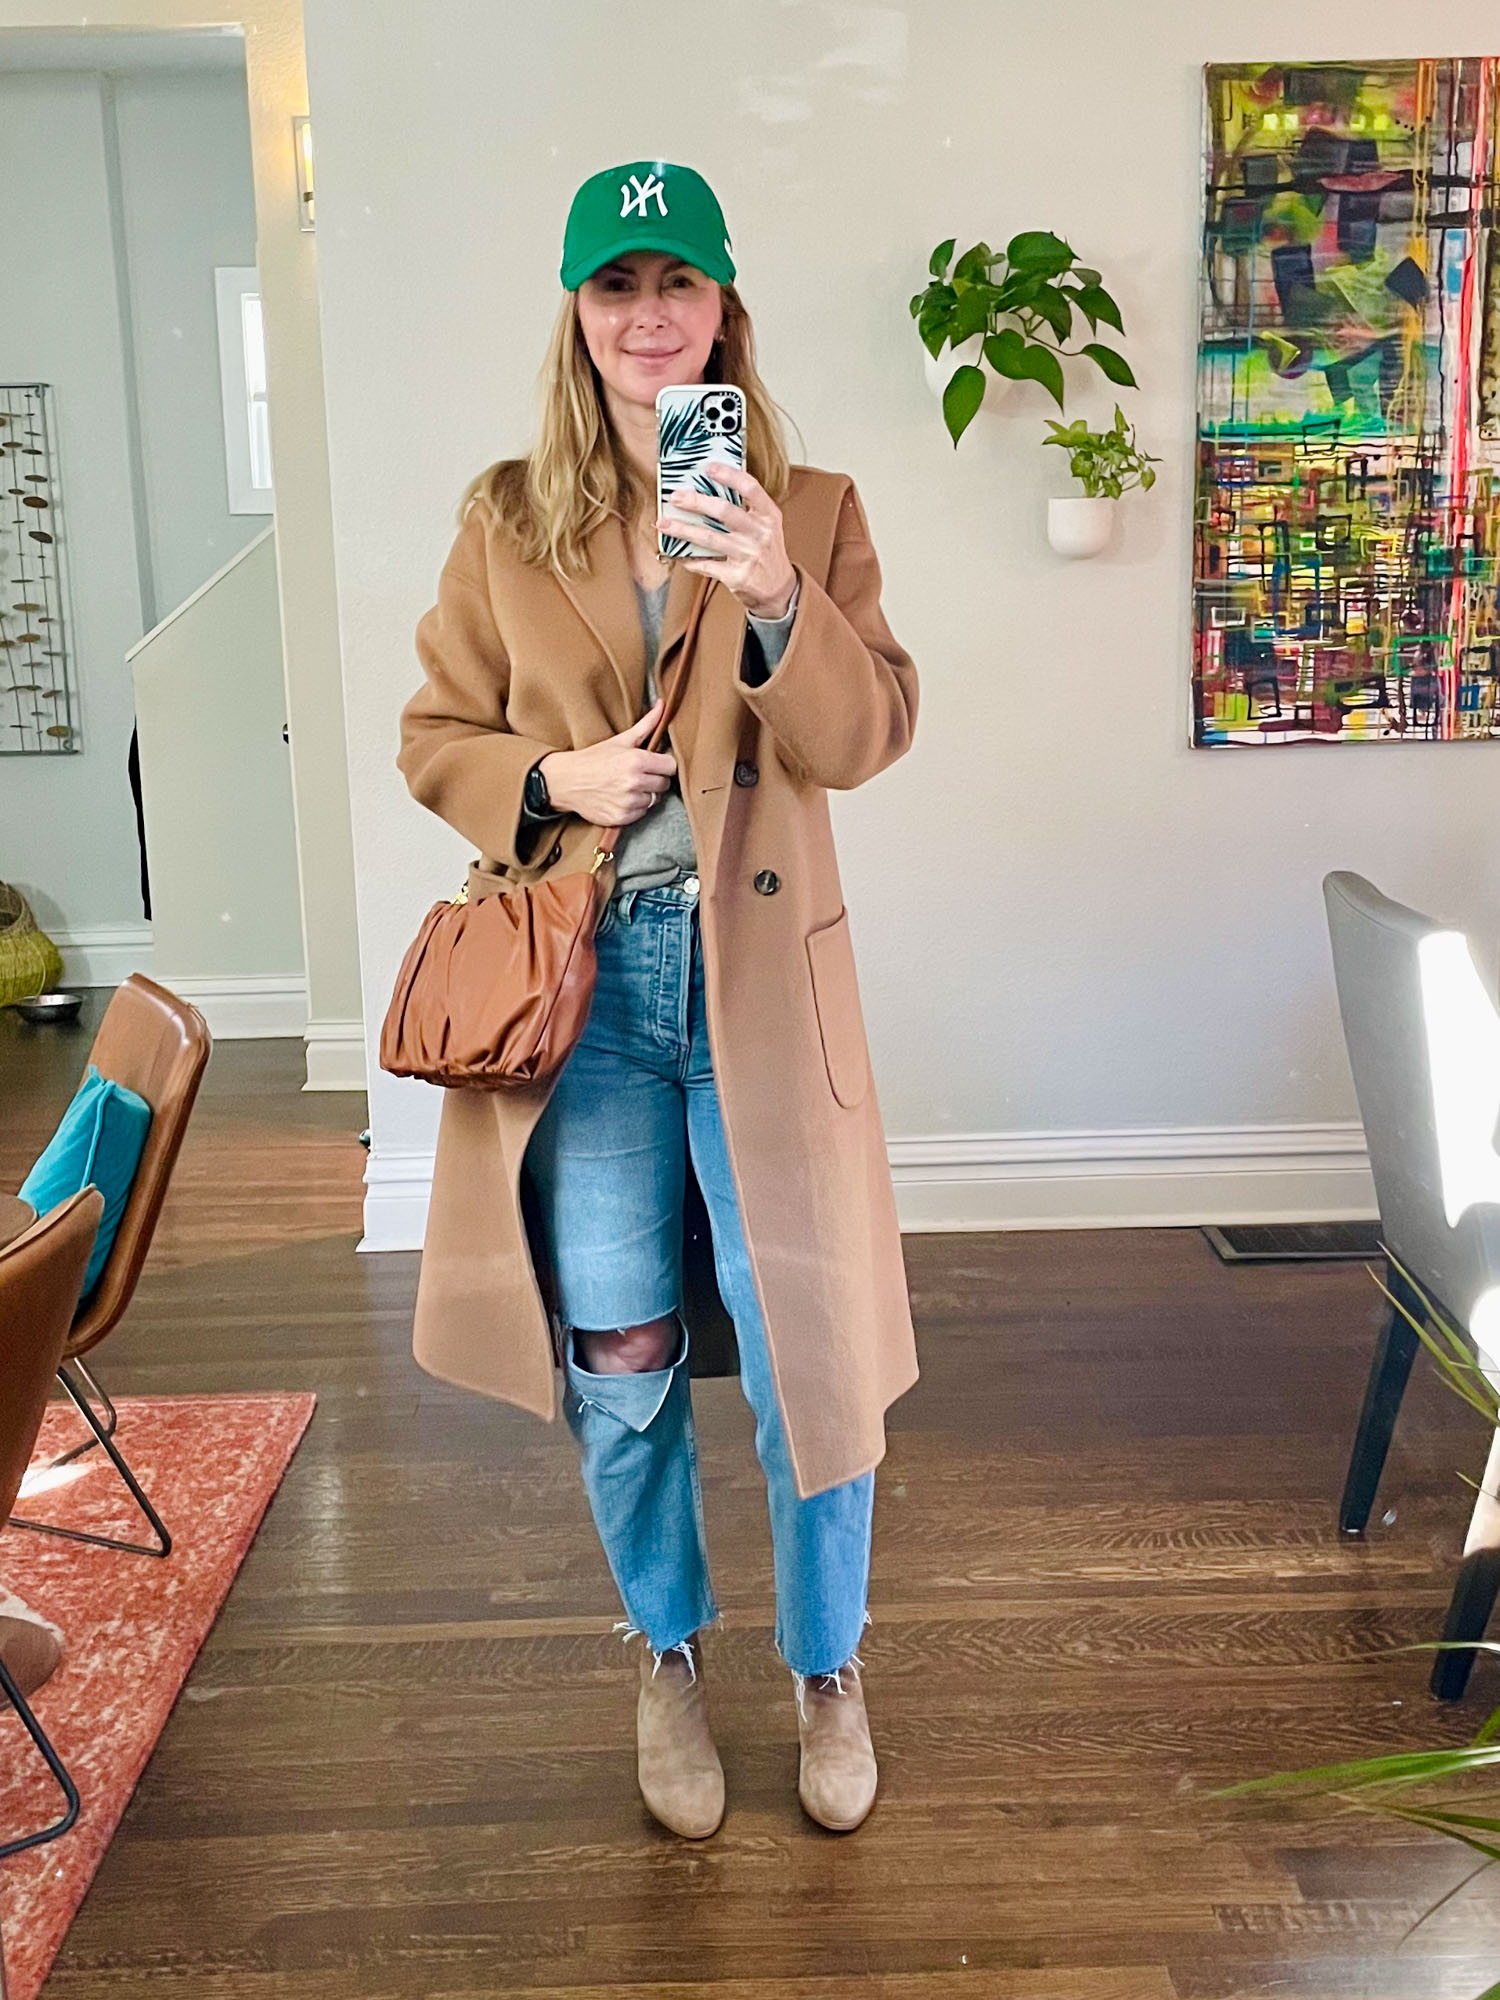 Wearing the Anine Bing camel coat casually with distressed jeans, a gray swater and a green NY Yankees baseball cap.